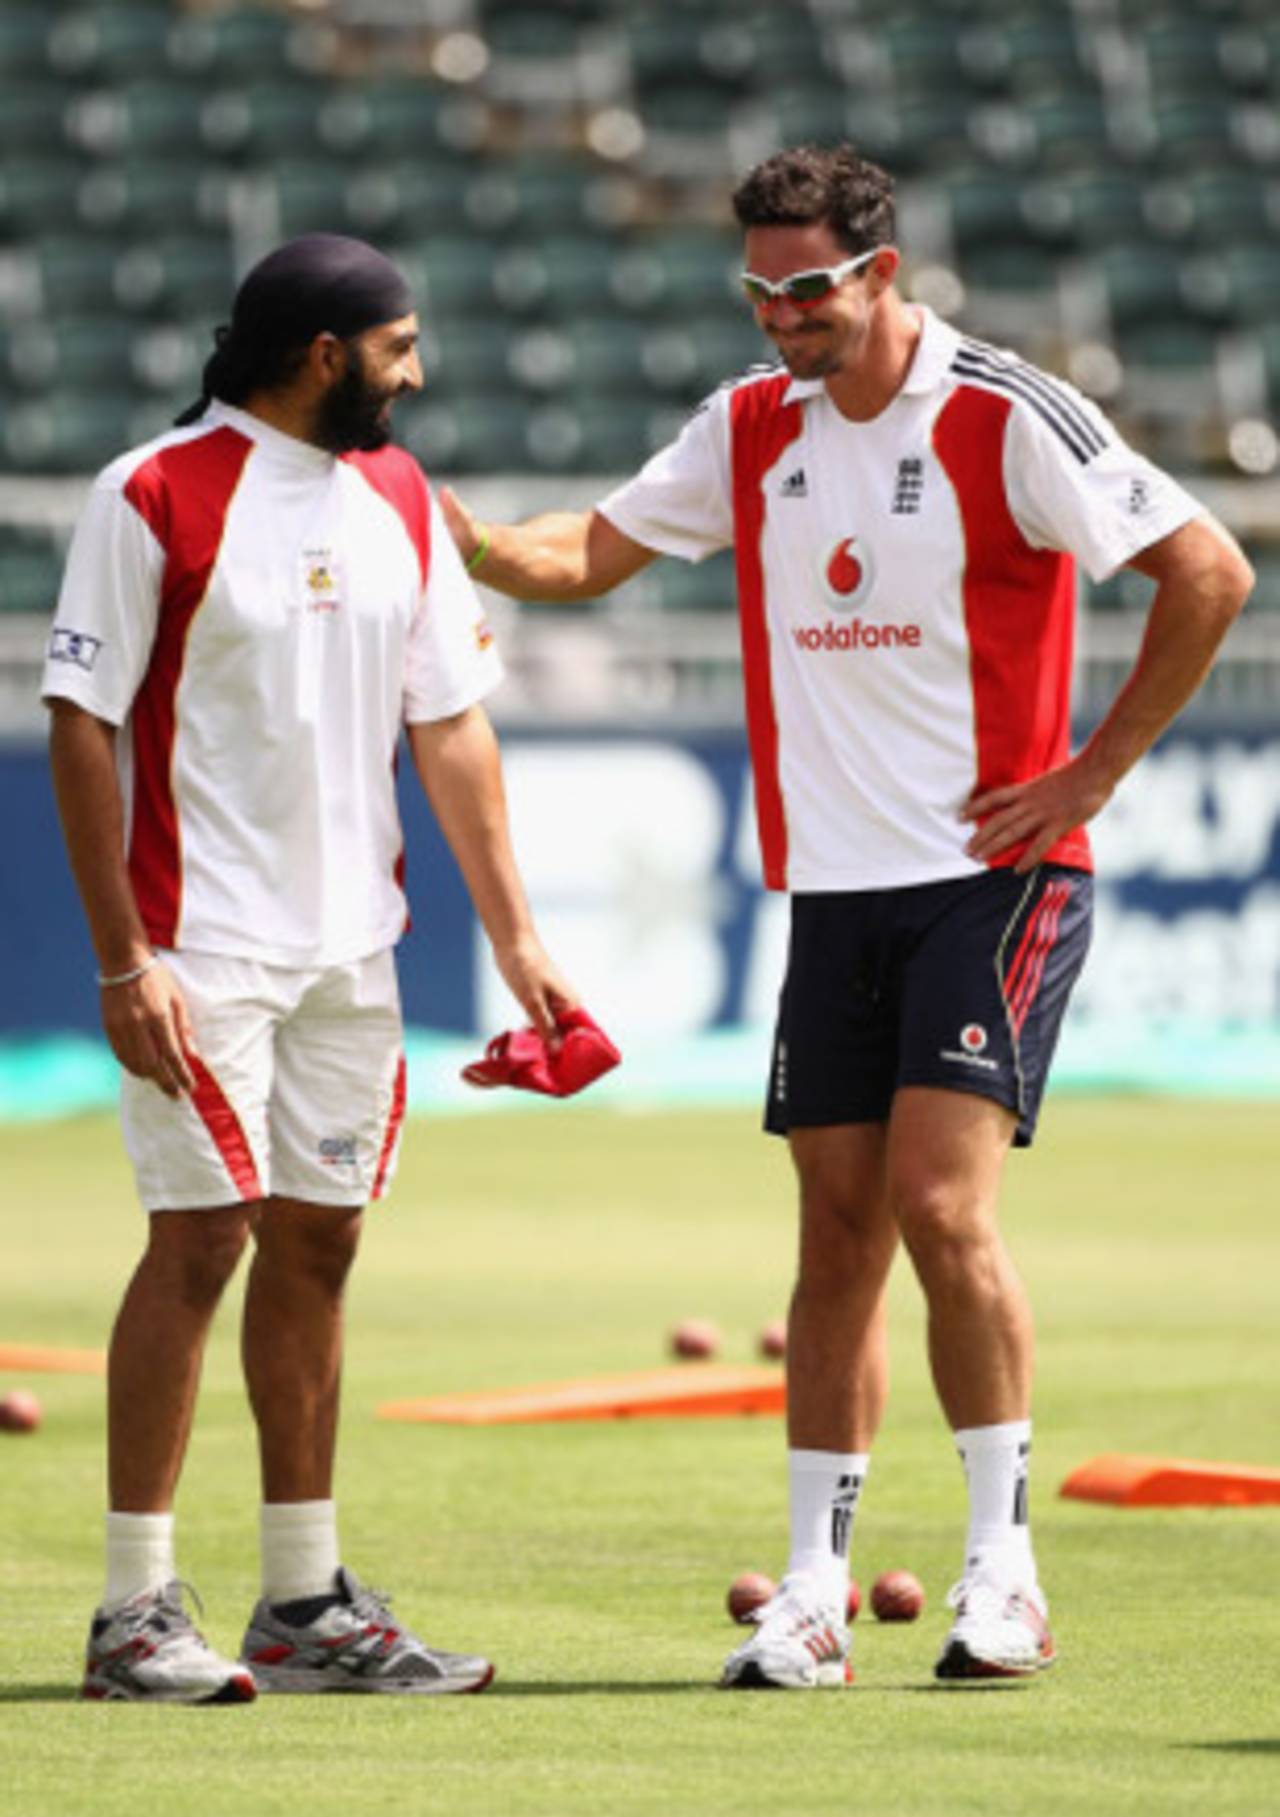 Monty Panesar and Kevin Pietersen share a lighter moment during England's training session ahead of the fourth Test at the Wanderers, England Tour of South Africa, 11 January, 2010